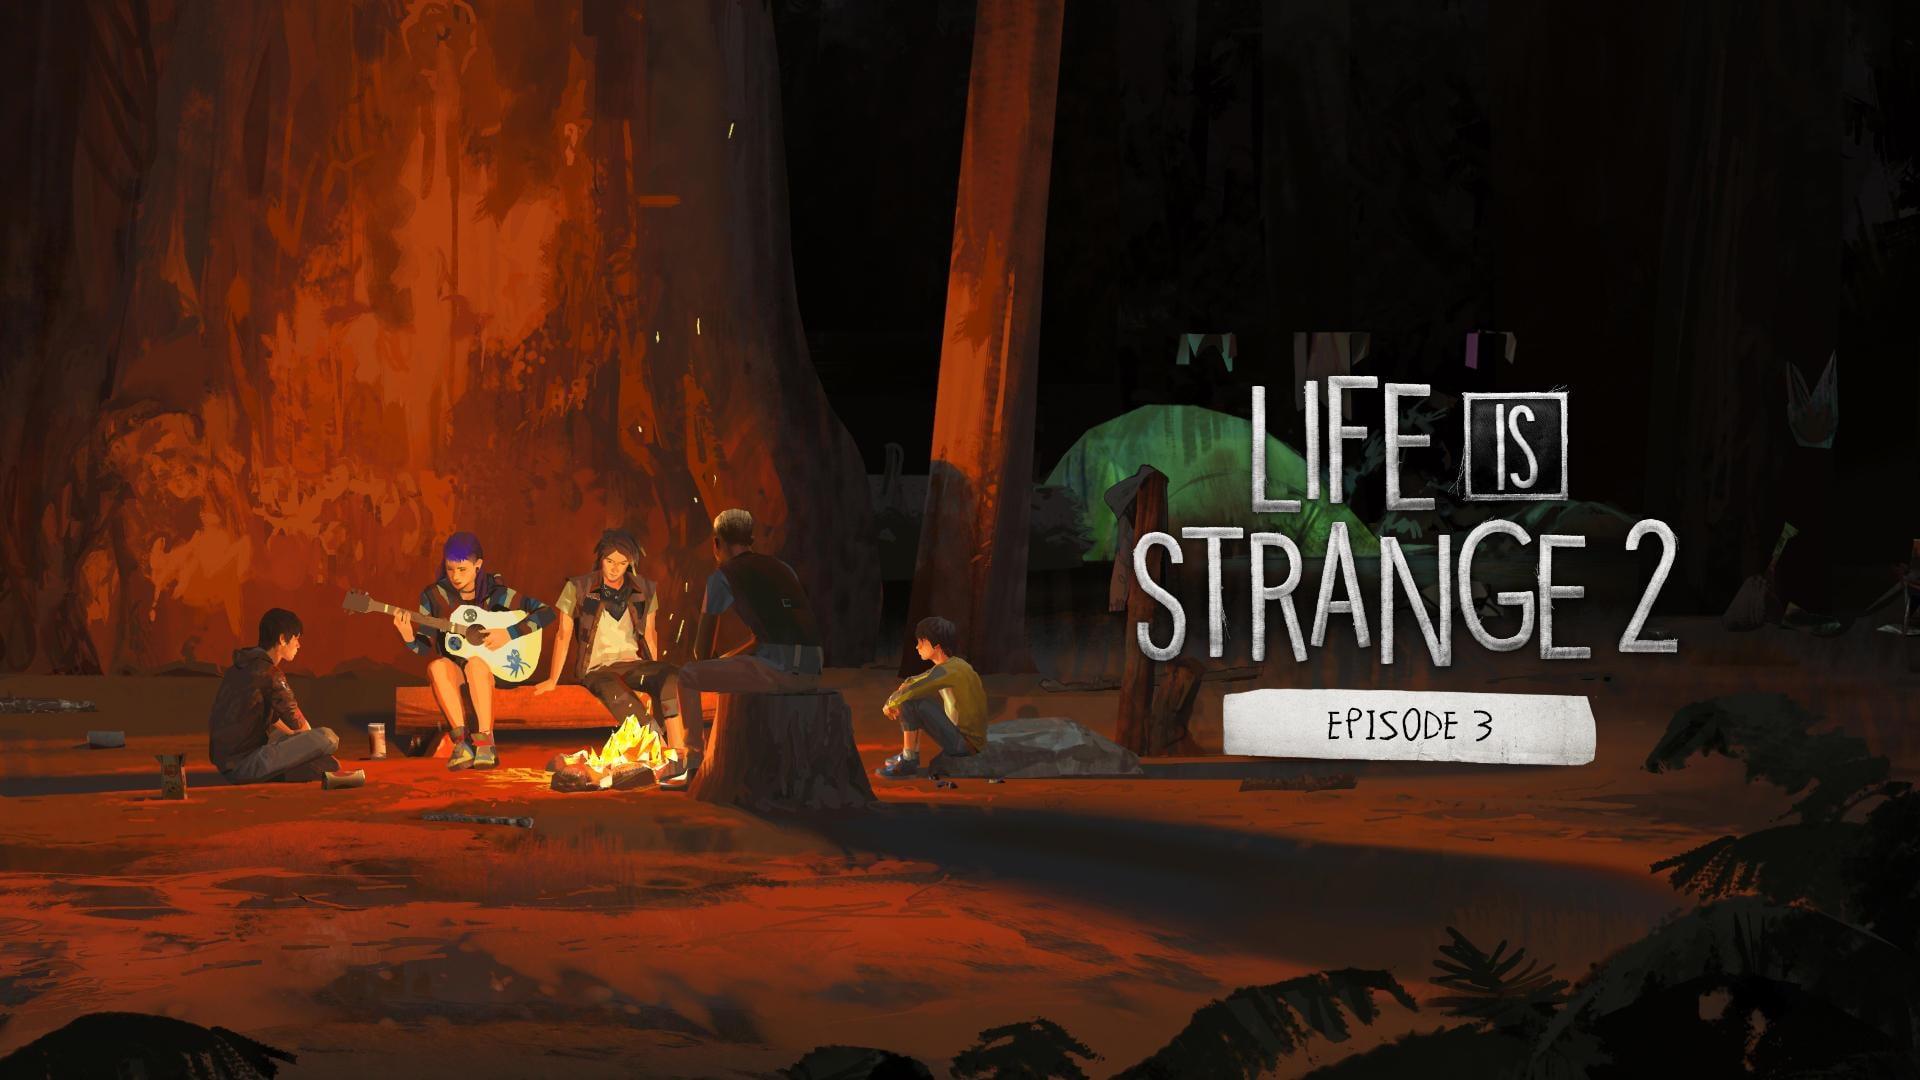 Life is Strange 2 Episode 3 Takes Players Into the Wastelands